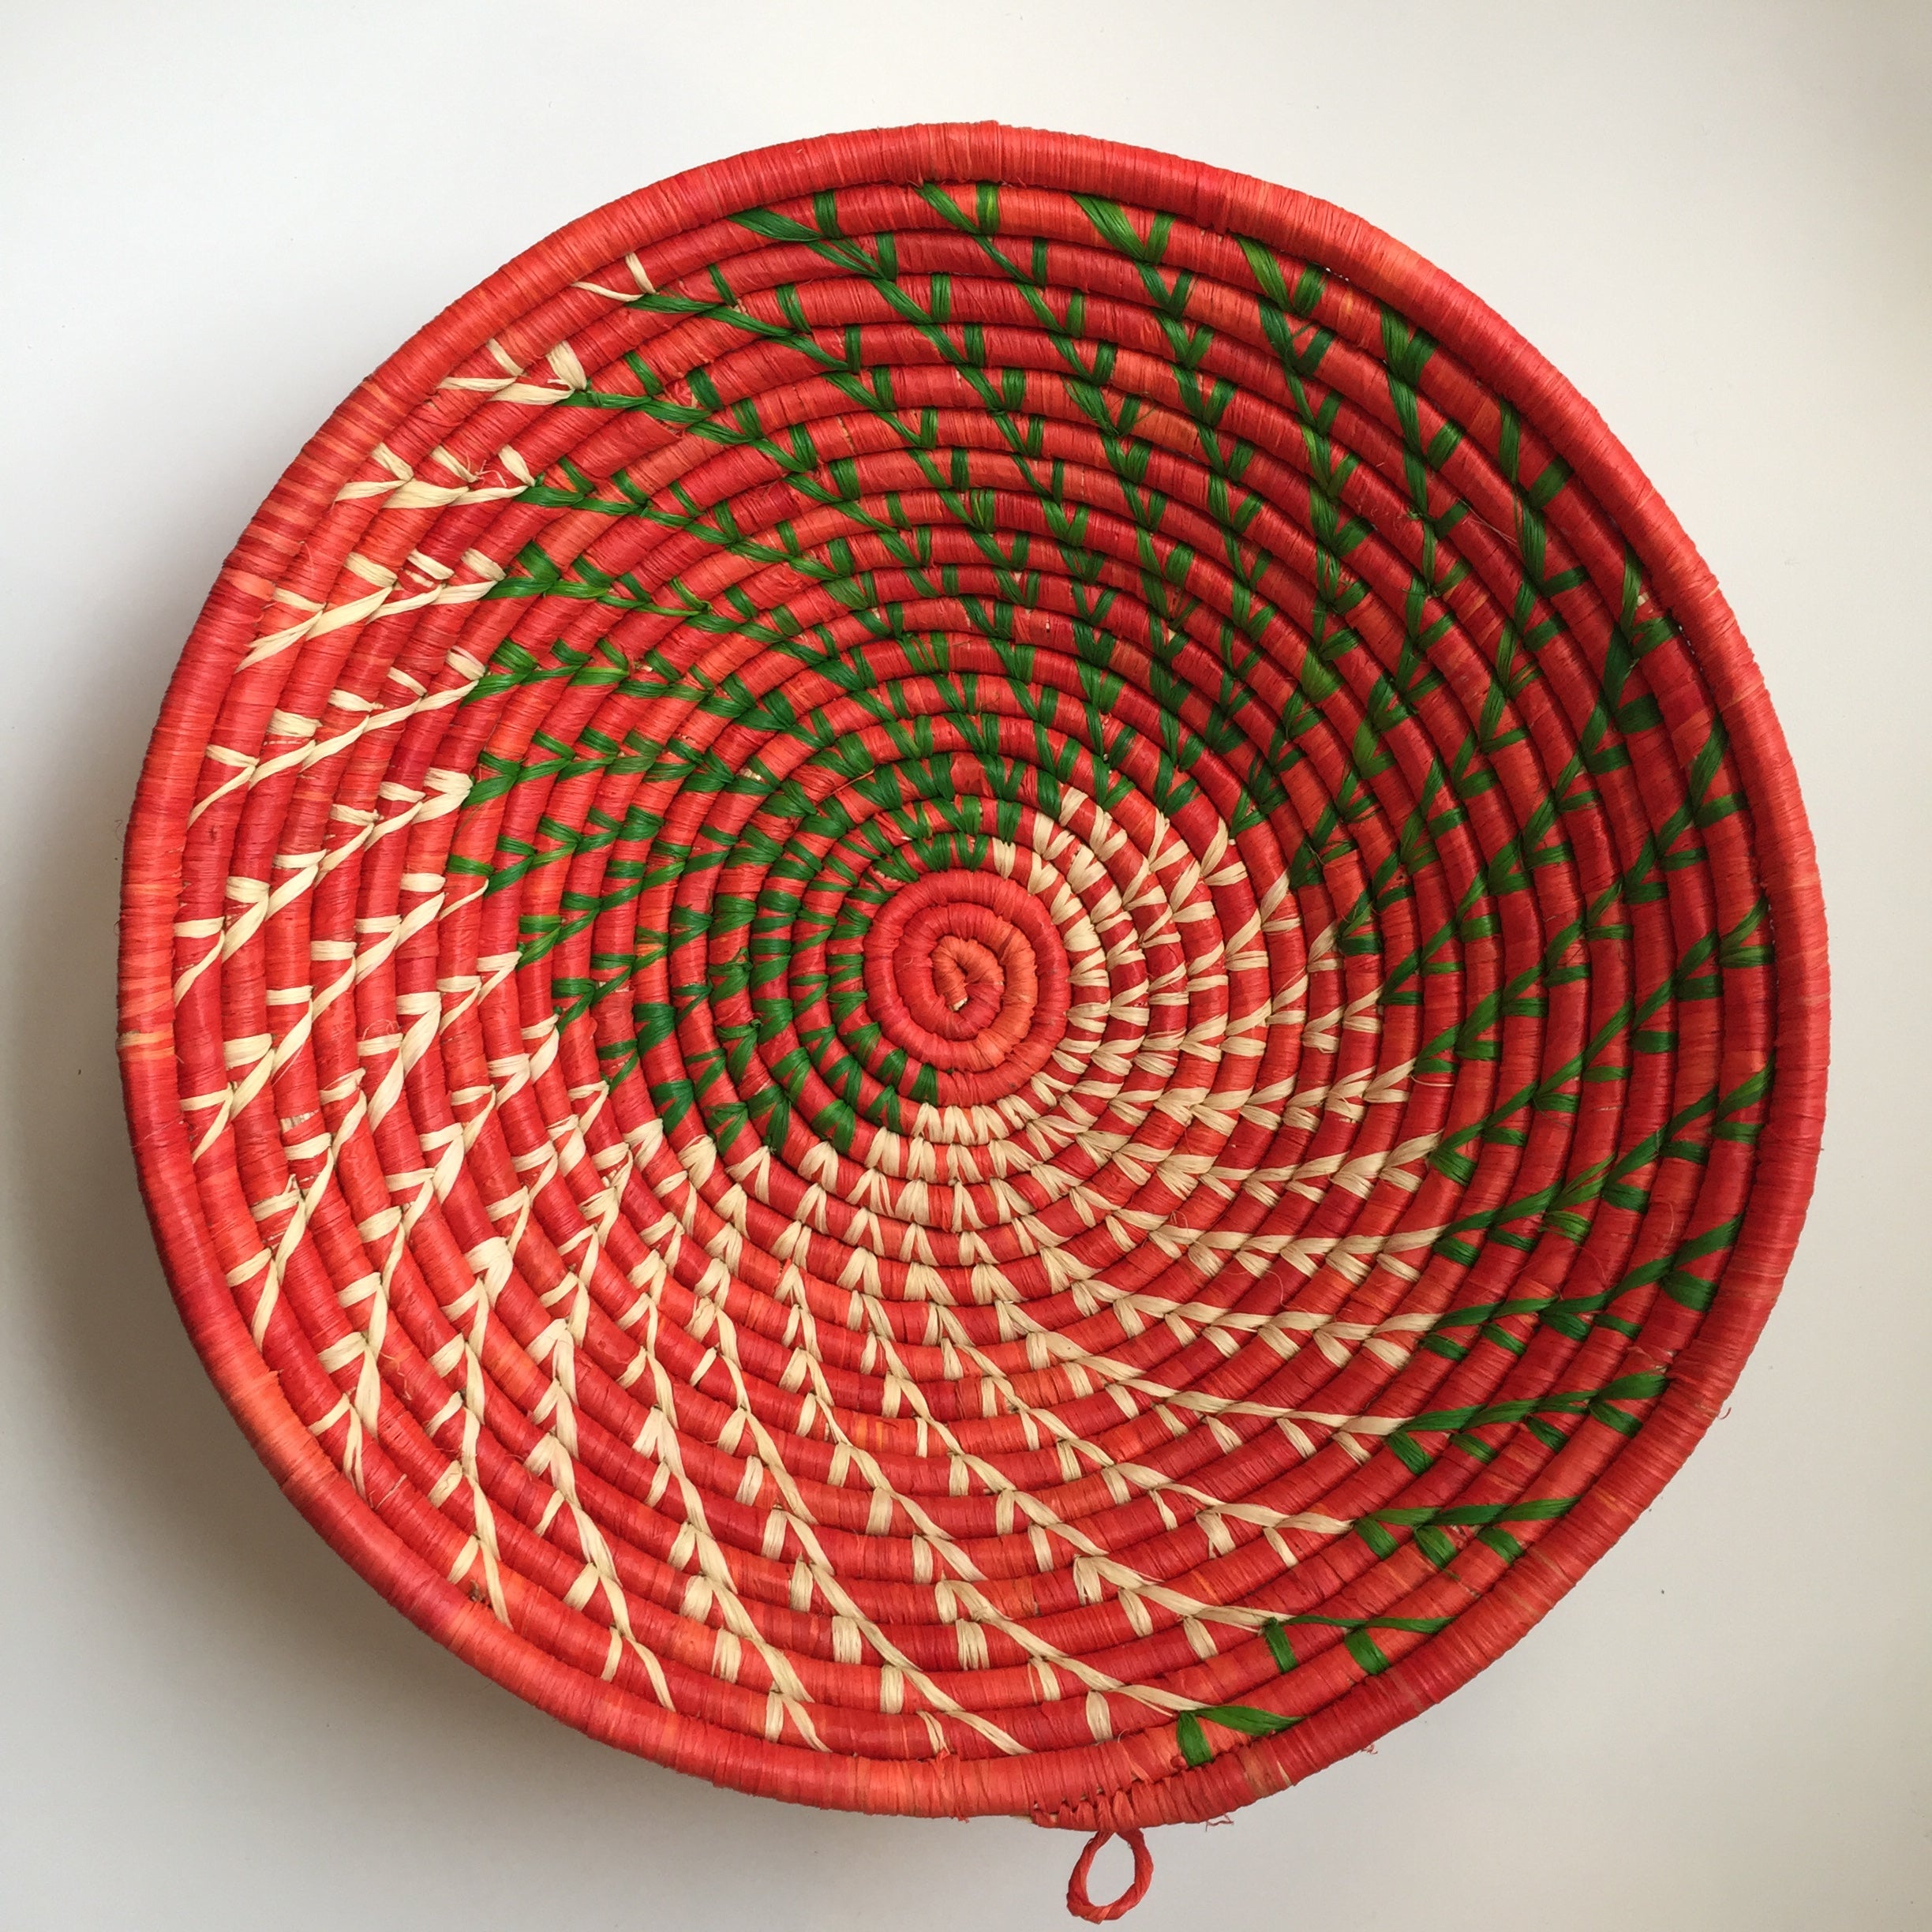 Red and green swirl woven bowls